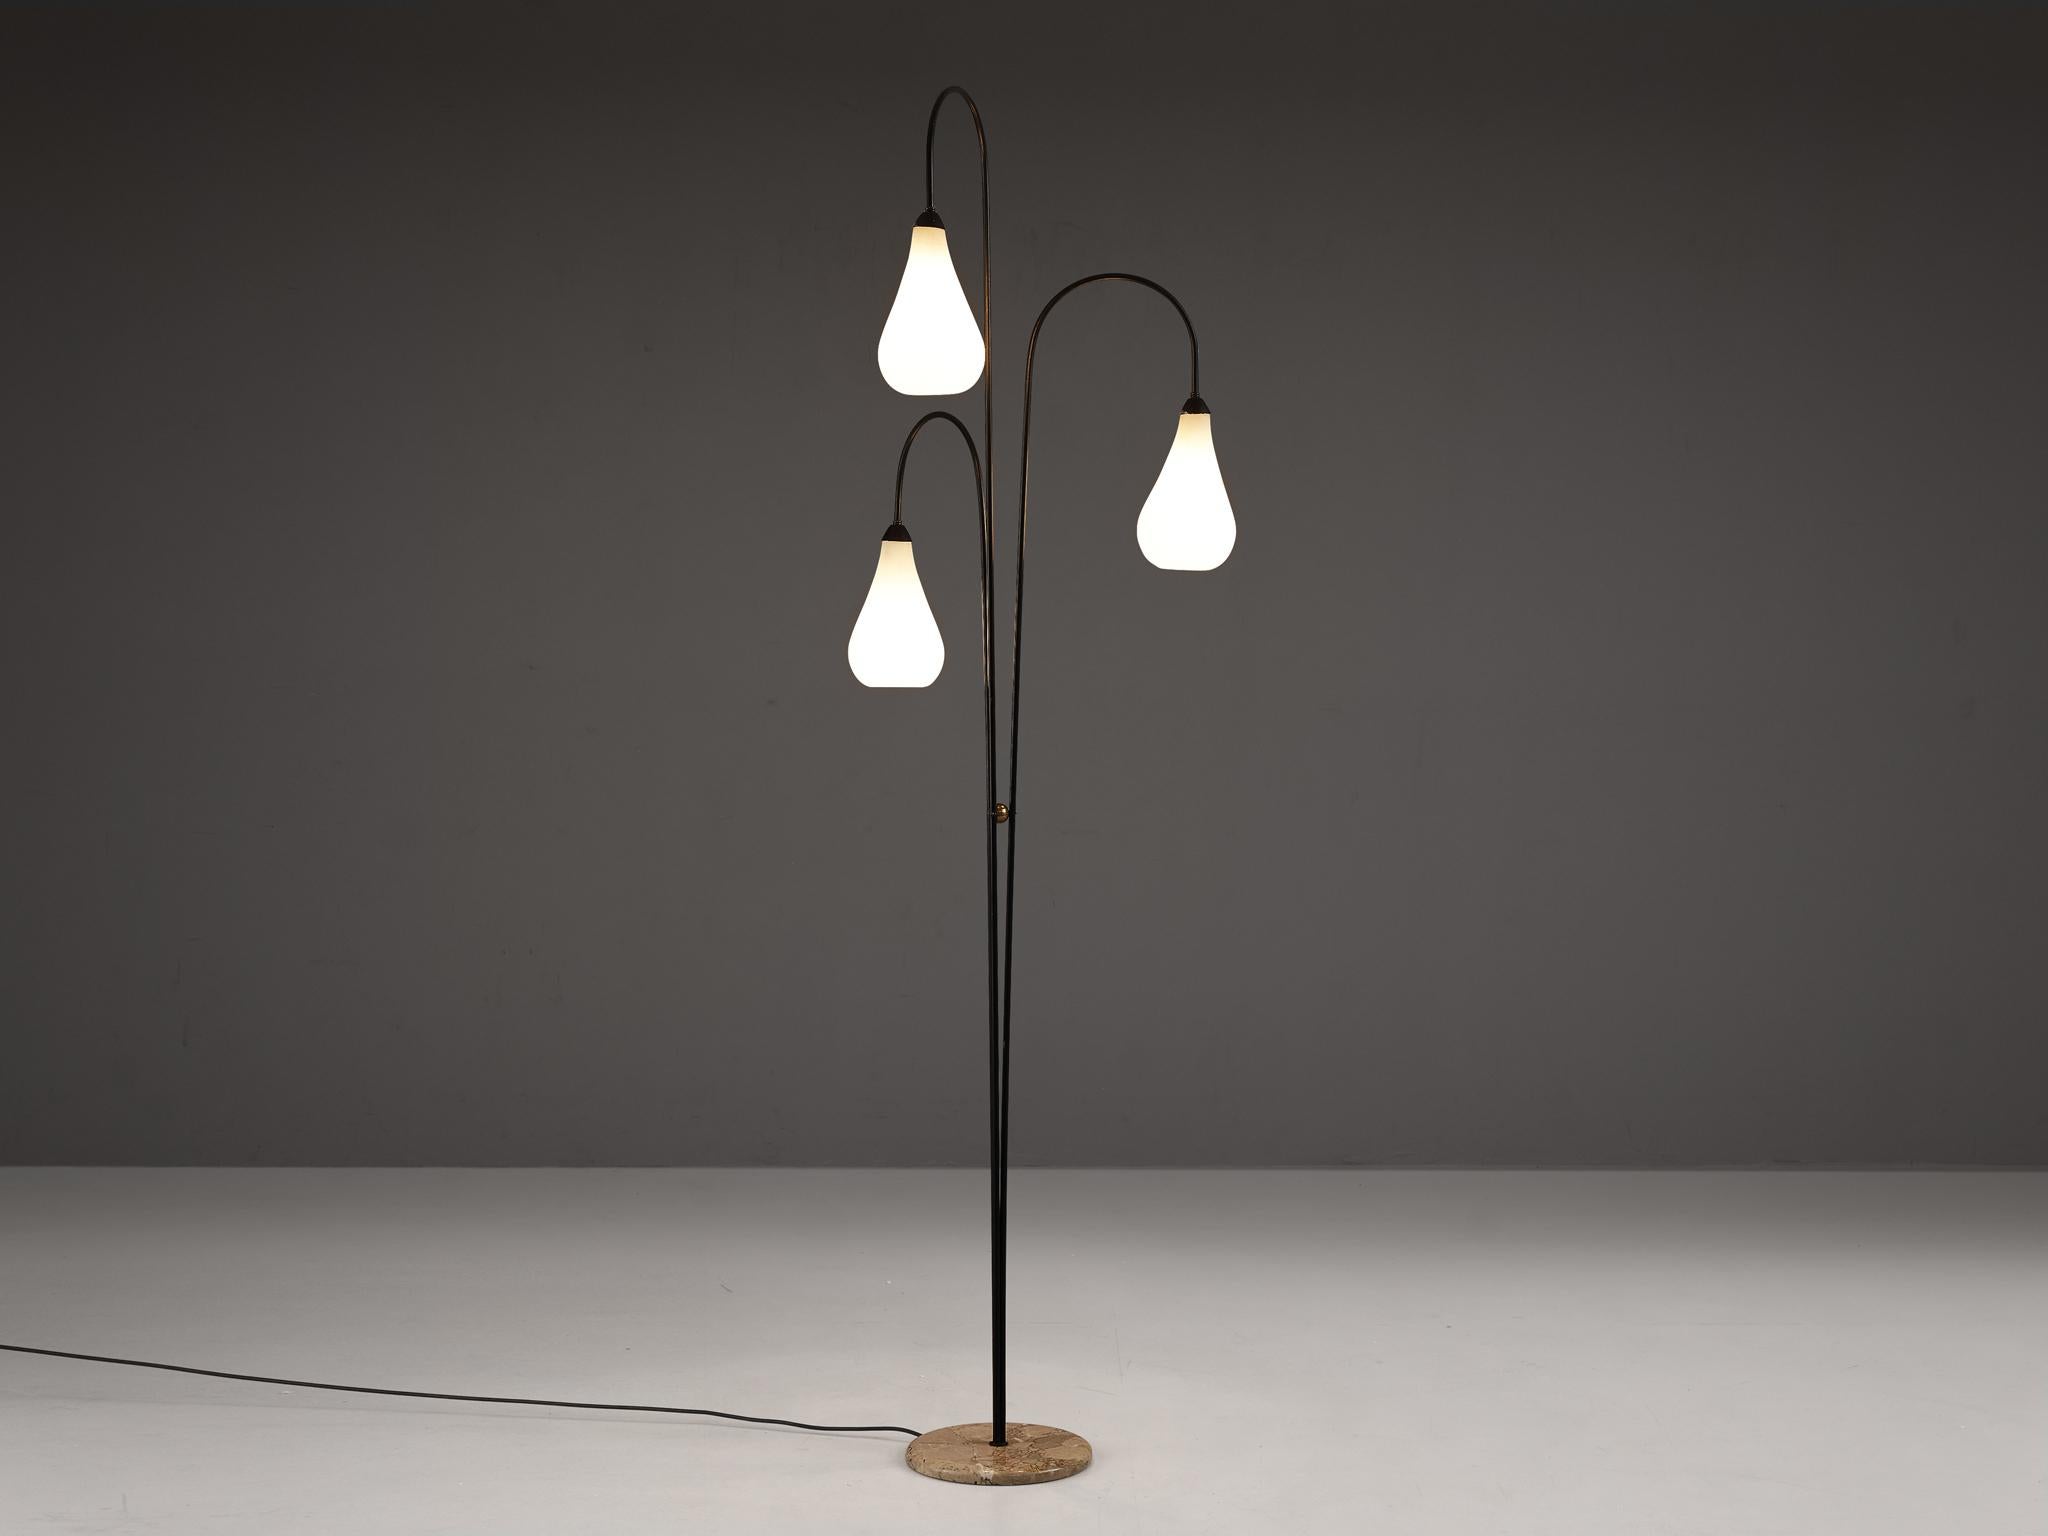 Floor lamp, glass, brass, marble, coated steel, Italy, 1960s 

Made in Italy, this elegant floor lamp features three curved arms each holding a white shade that reminds of water drops. The black coated steel rods are secured to a round marble base